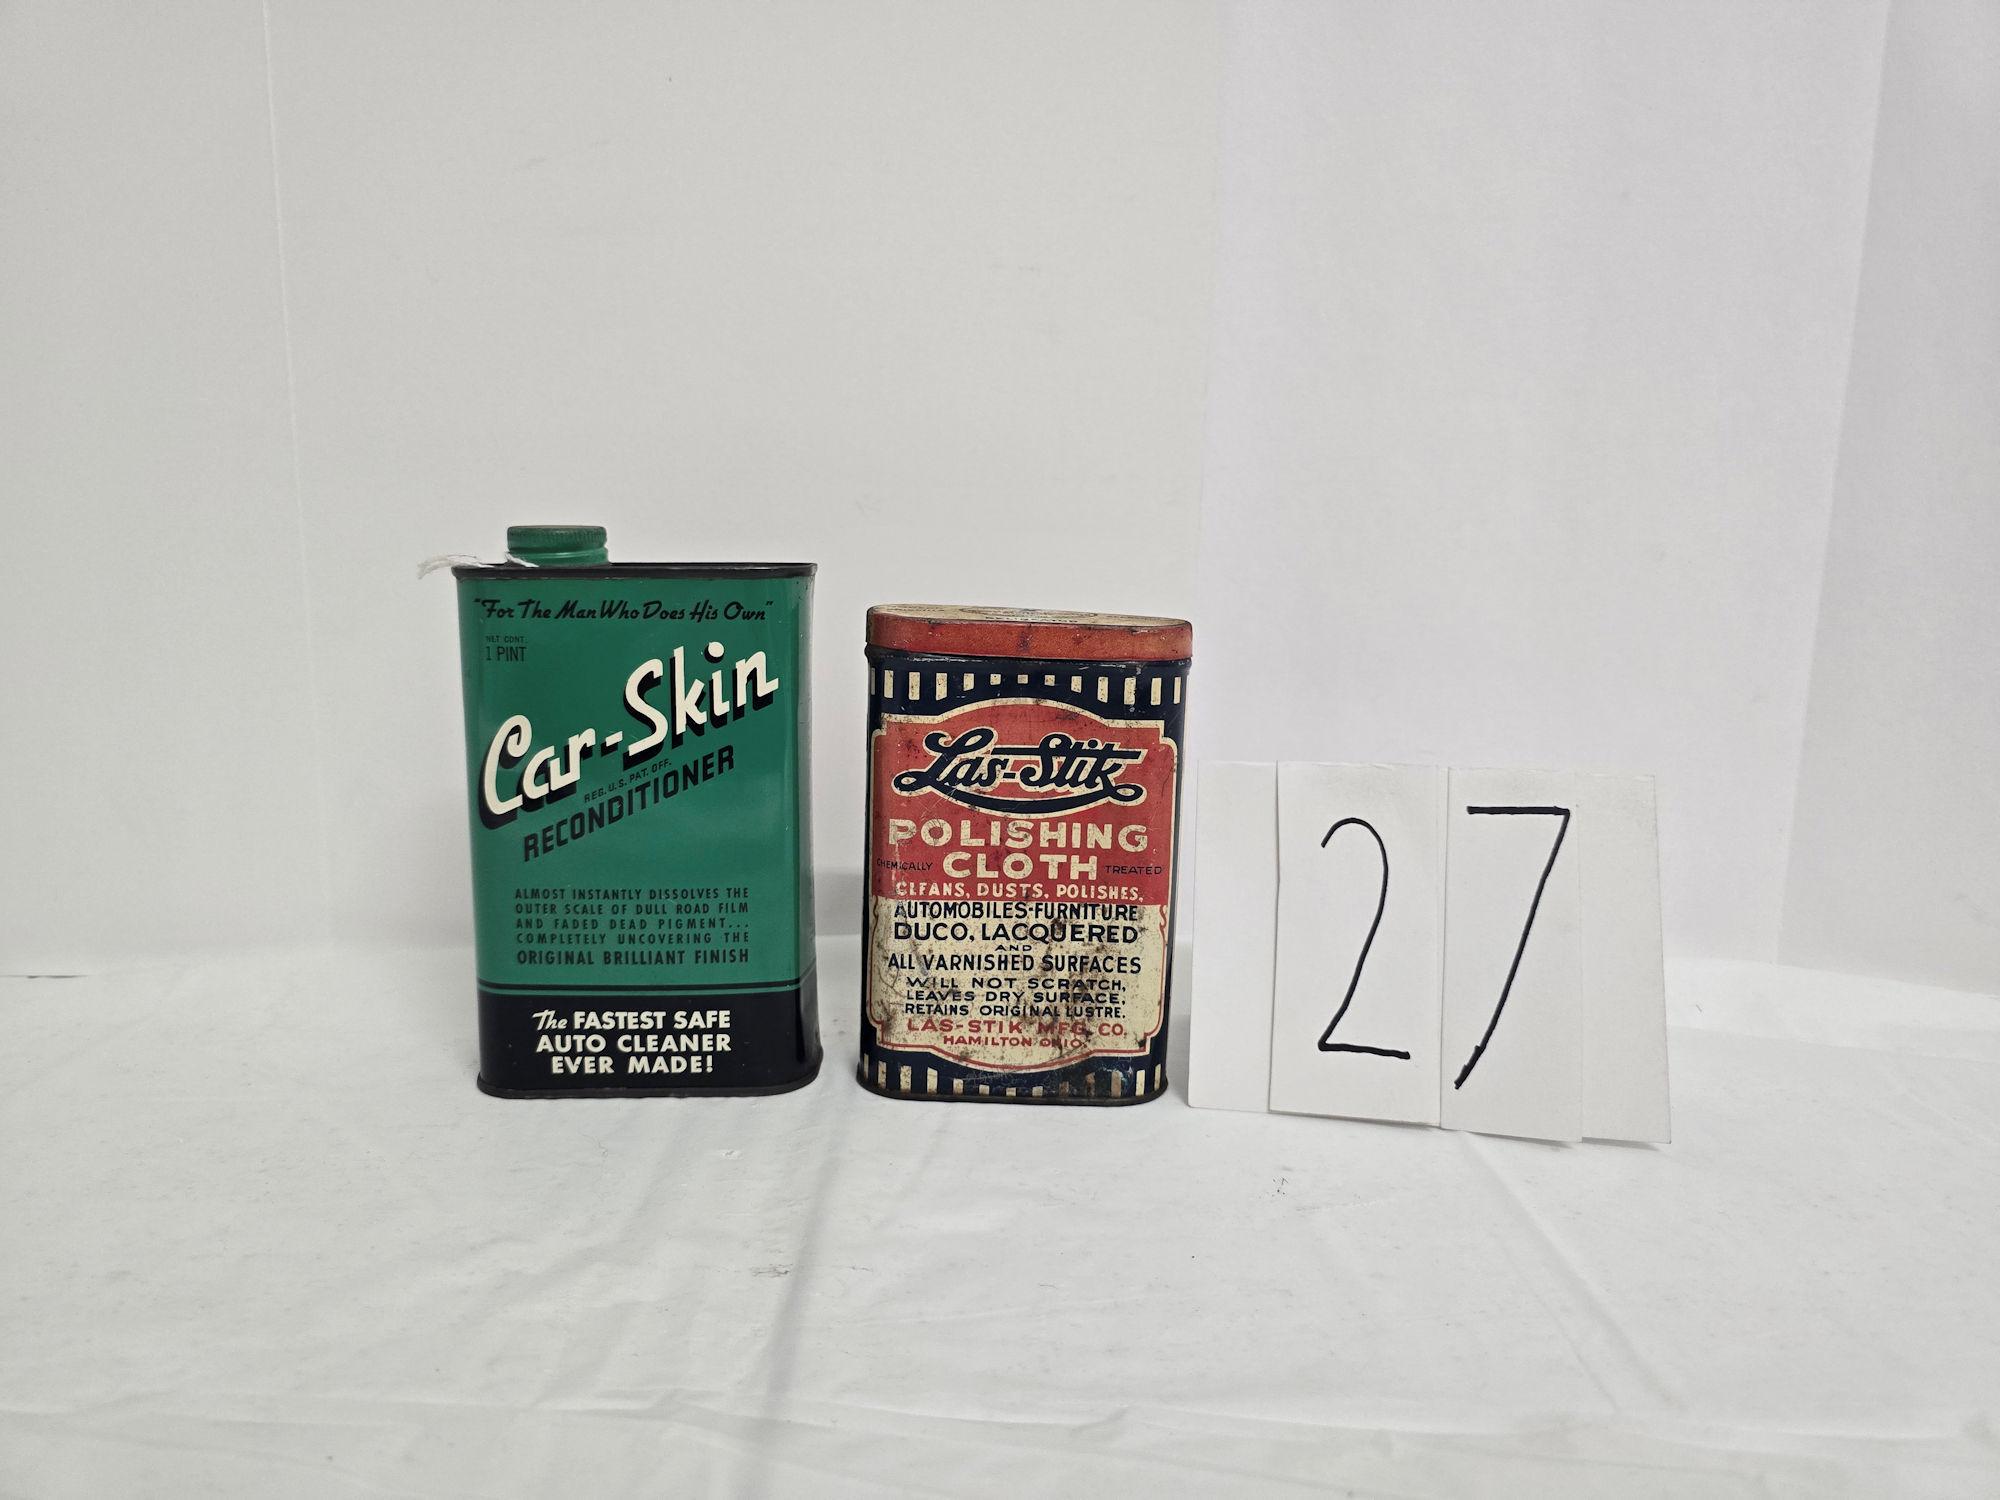 Car Skin Reconditioner Can Good Cond And Las-stik Polishing Cloth Can Fair Cond Both Empty